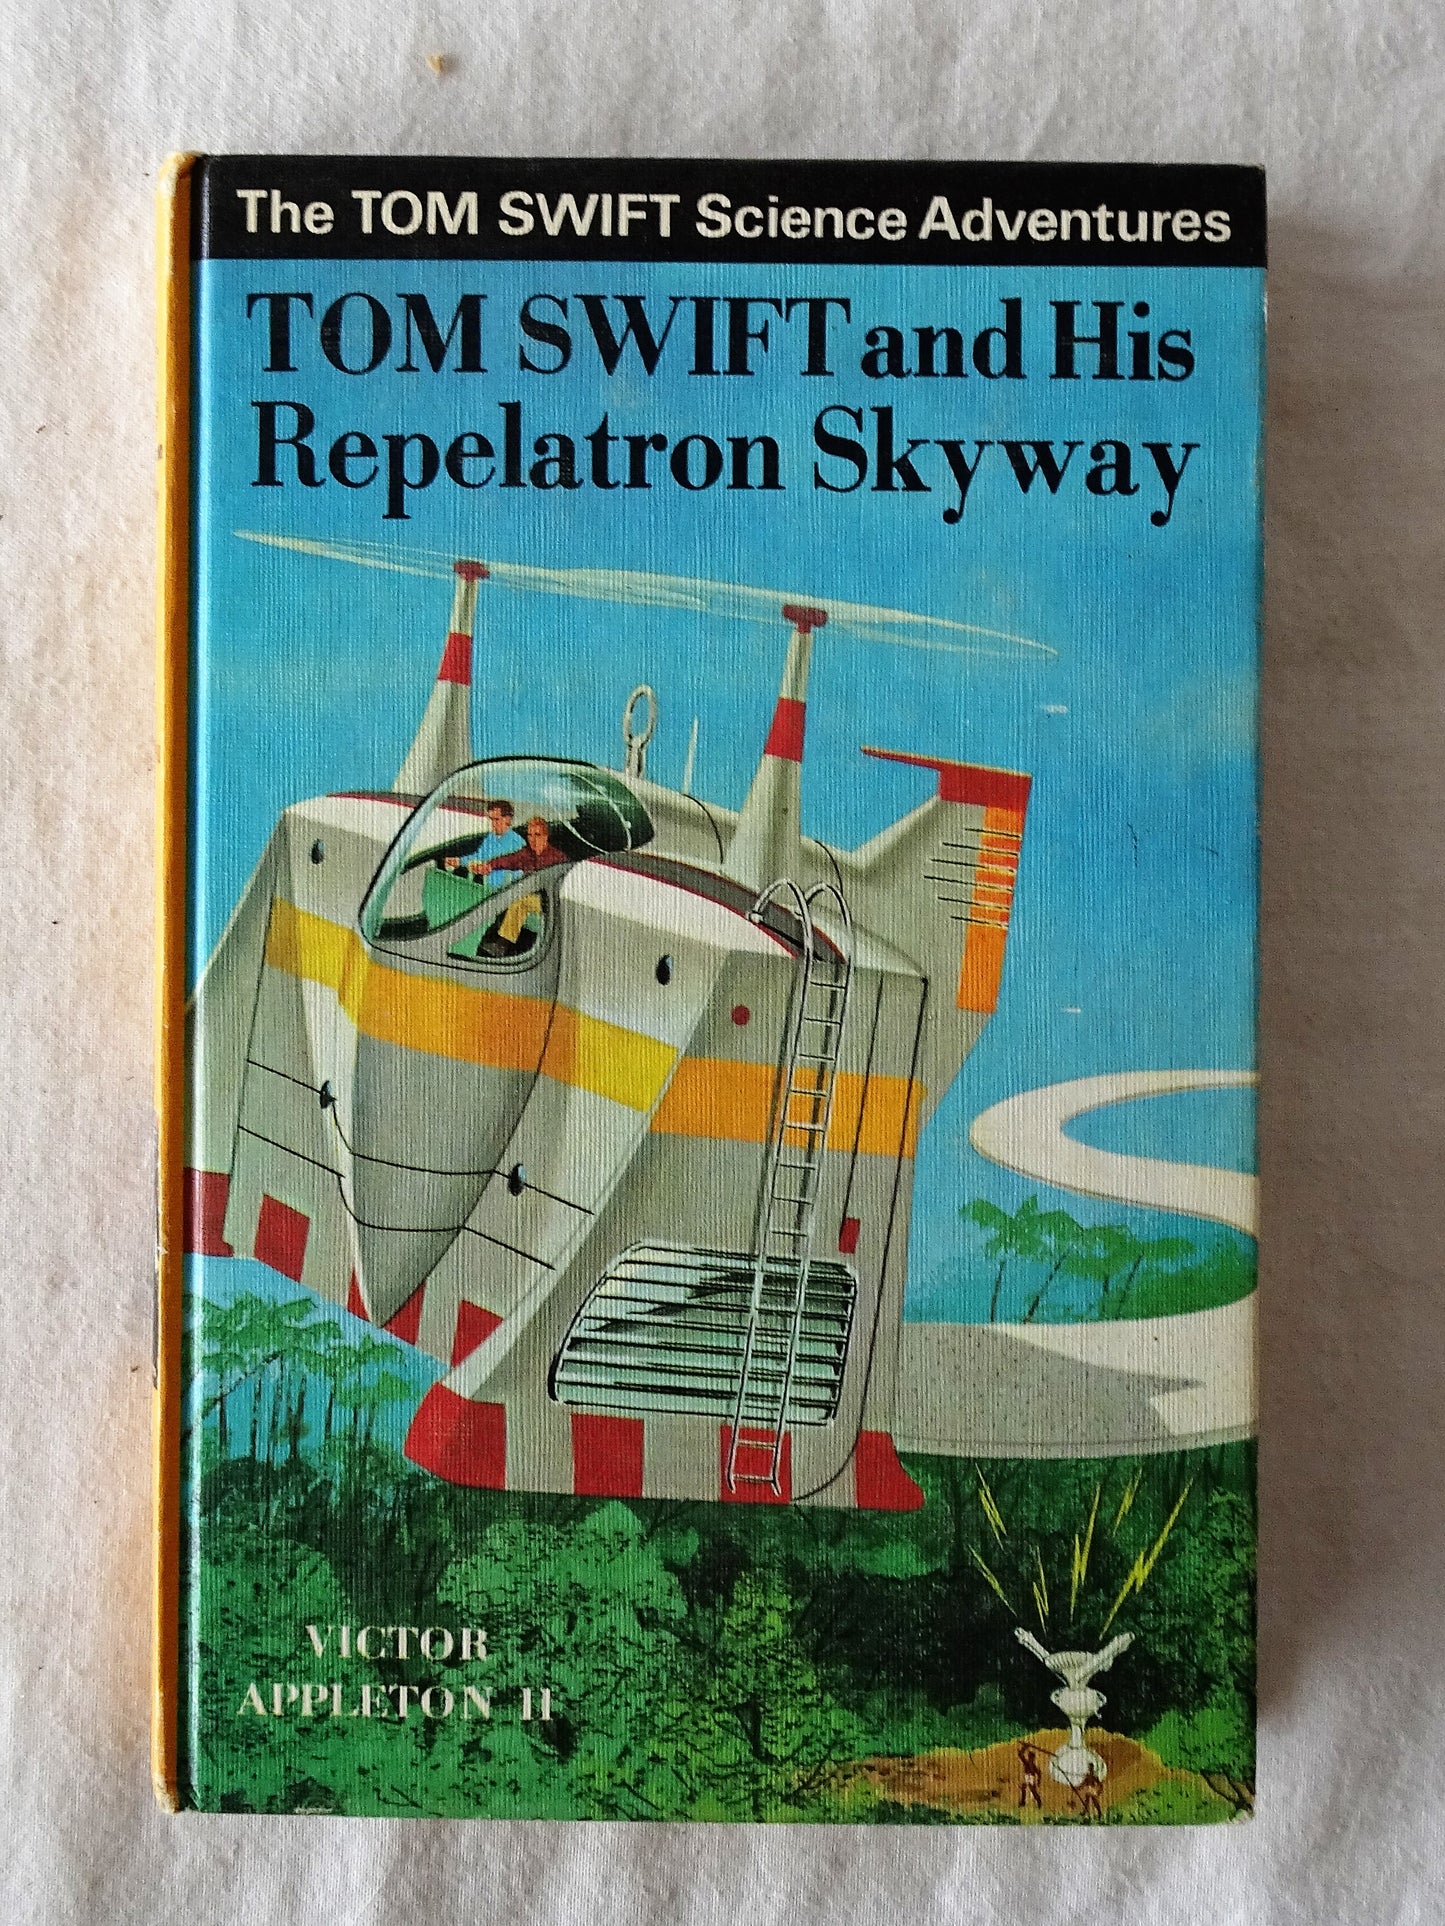 Tom Swift and His Repelatron Skyway  by Victor Appleton II